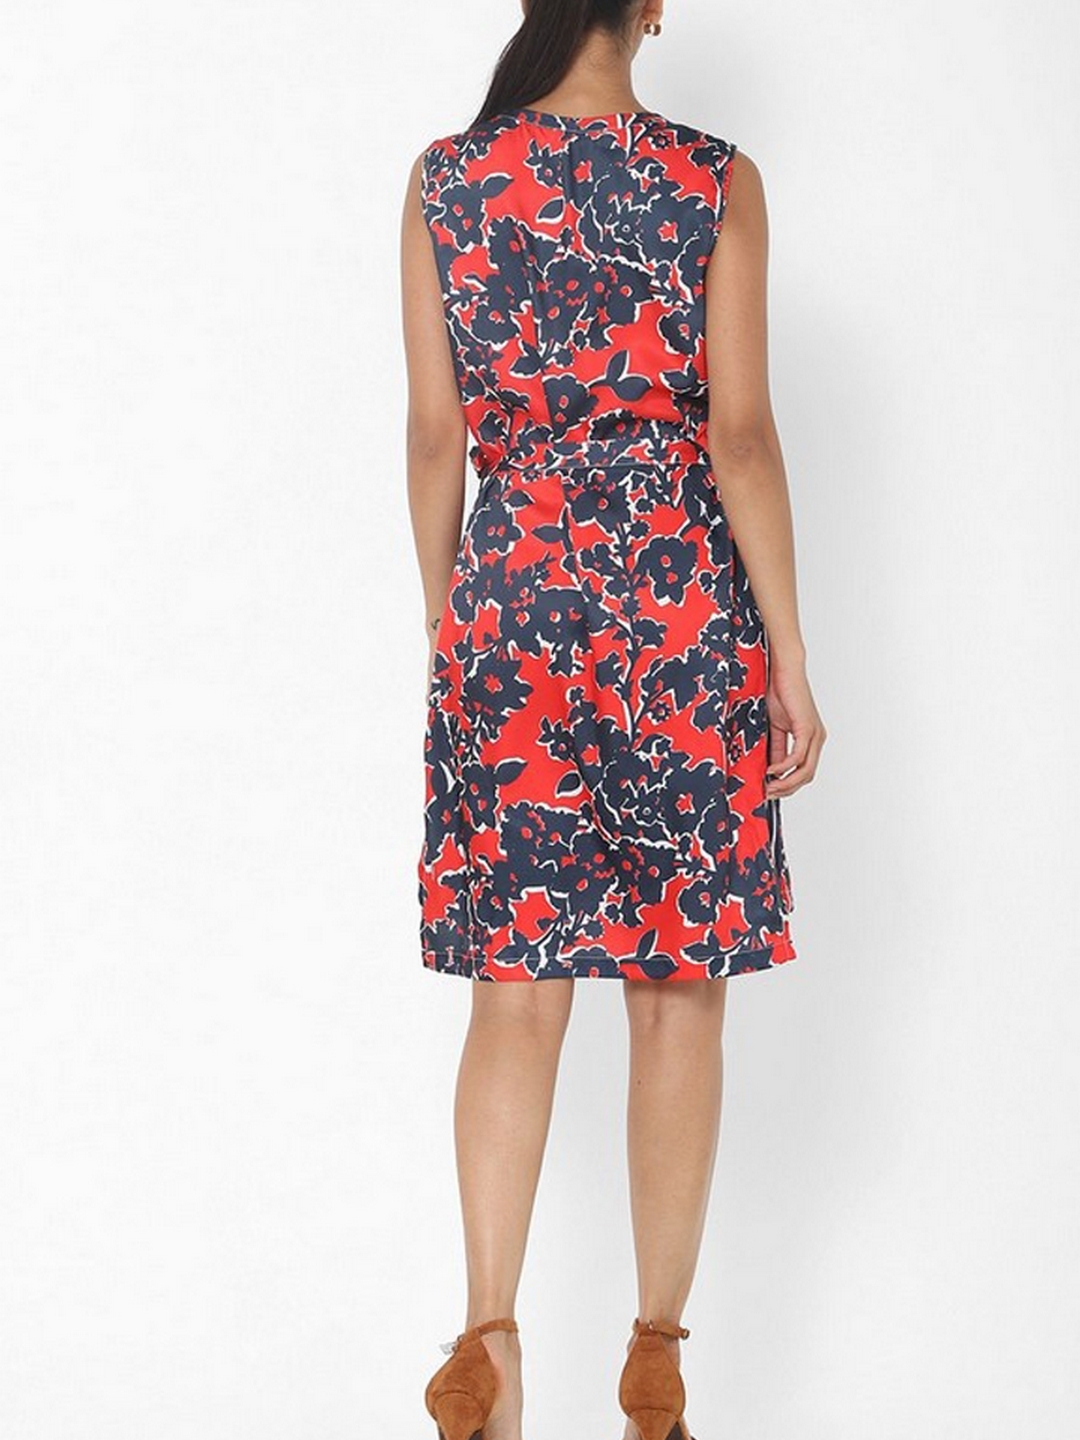 Floral Print Dress with Waist Tie-Up